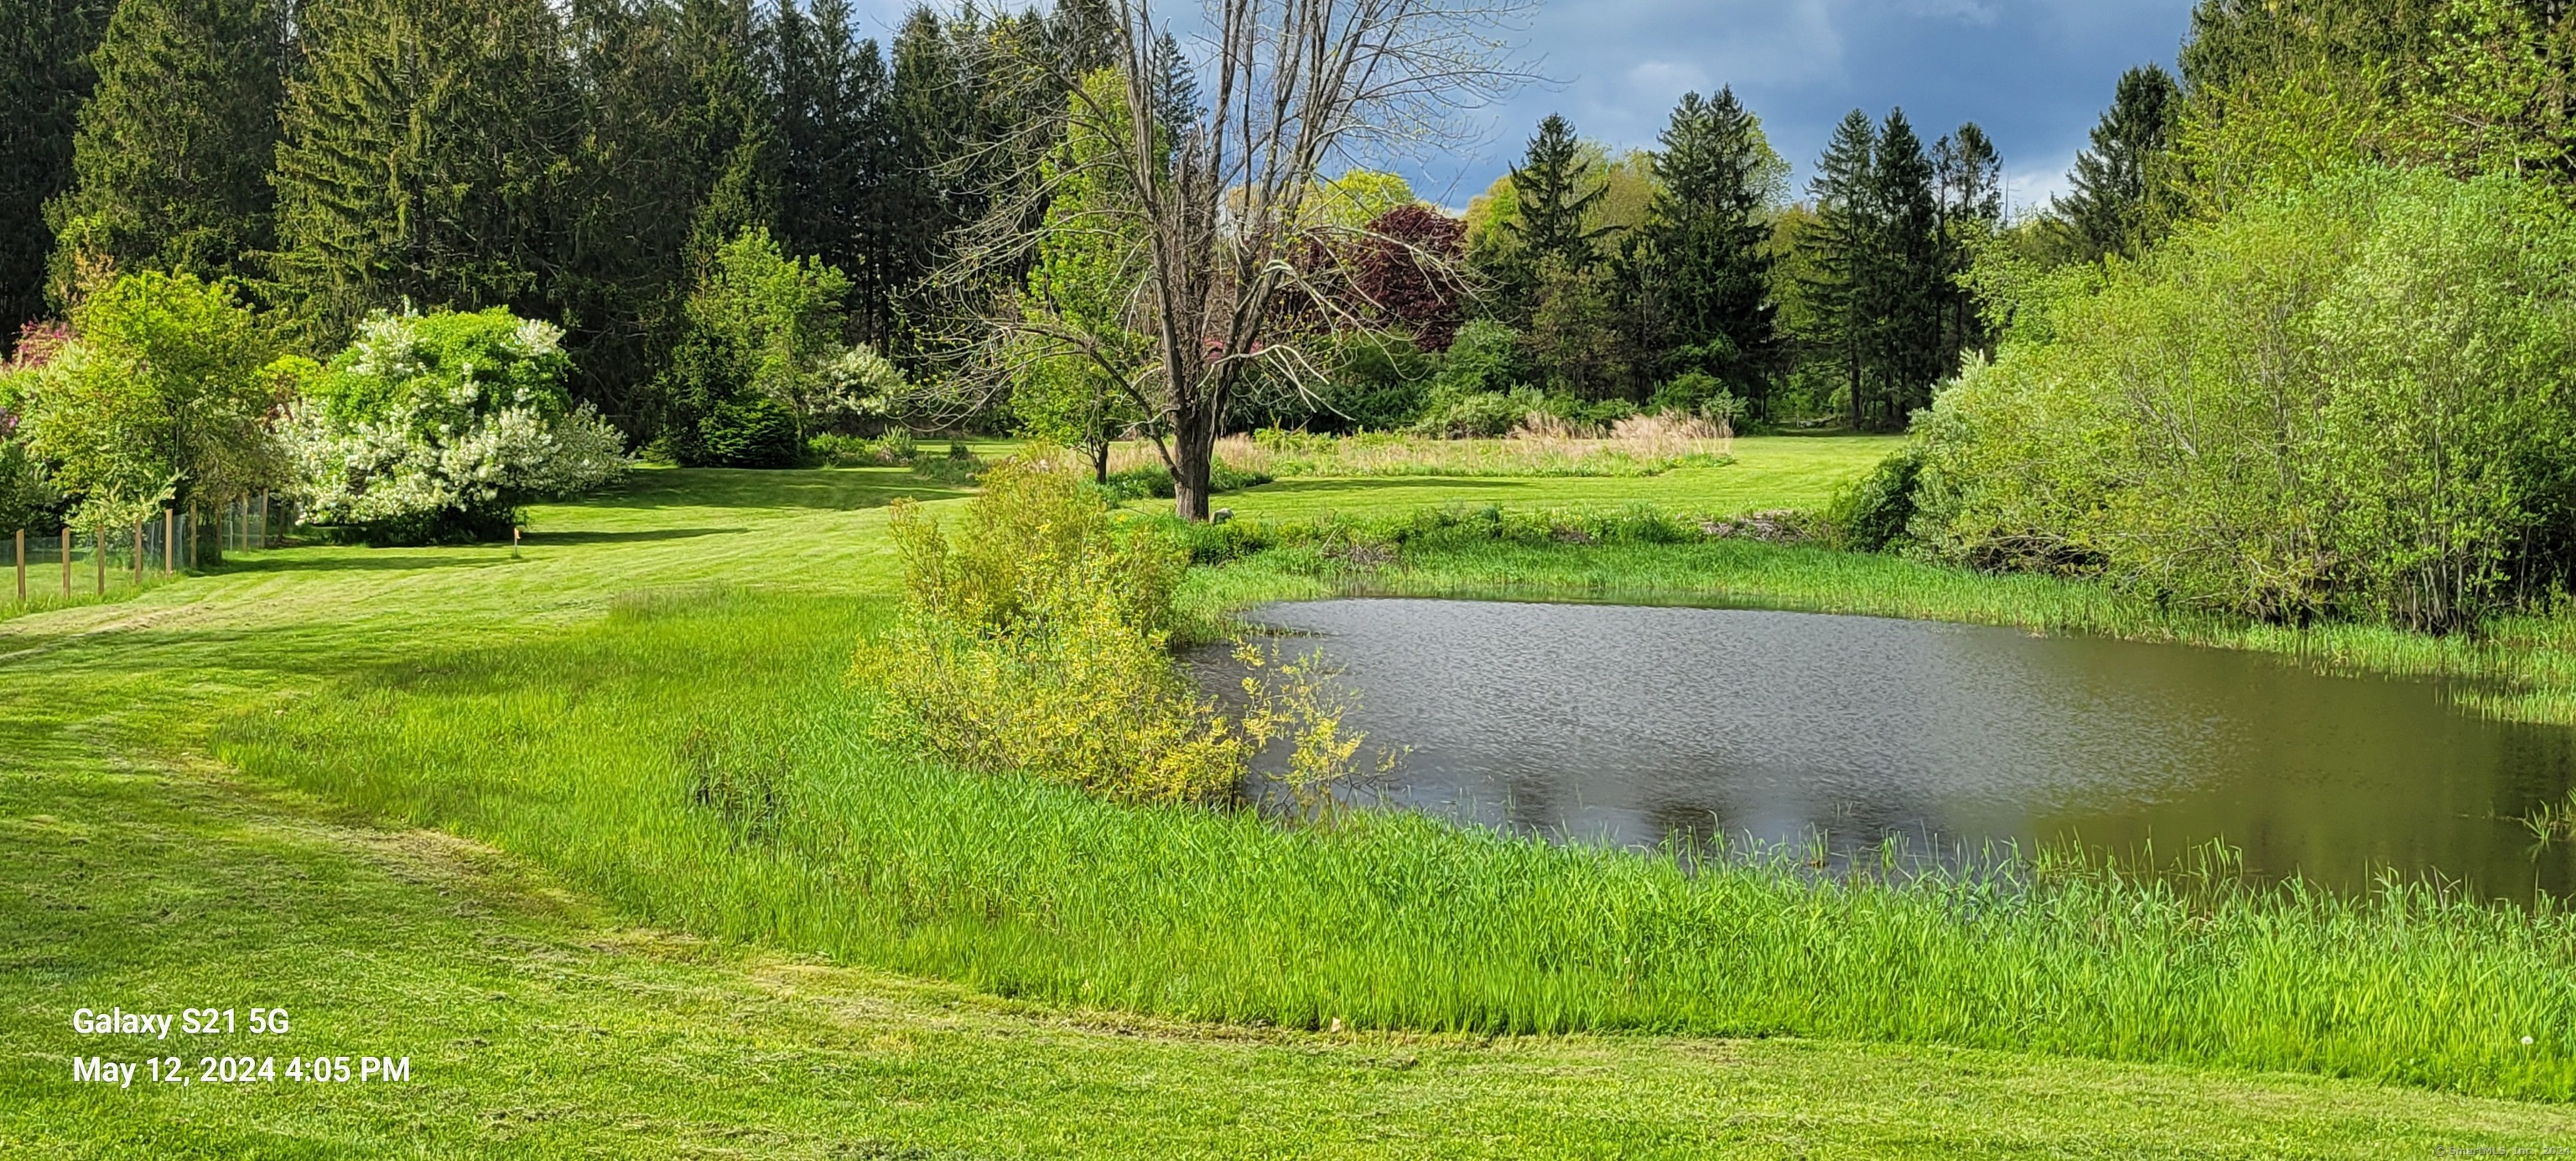 Pond toward rear of lot, pic facing proposed house location